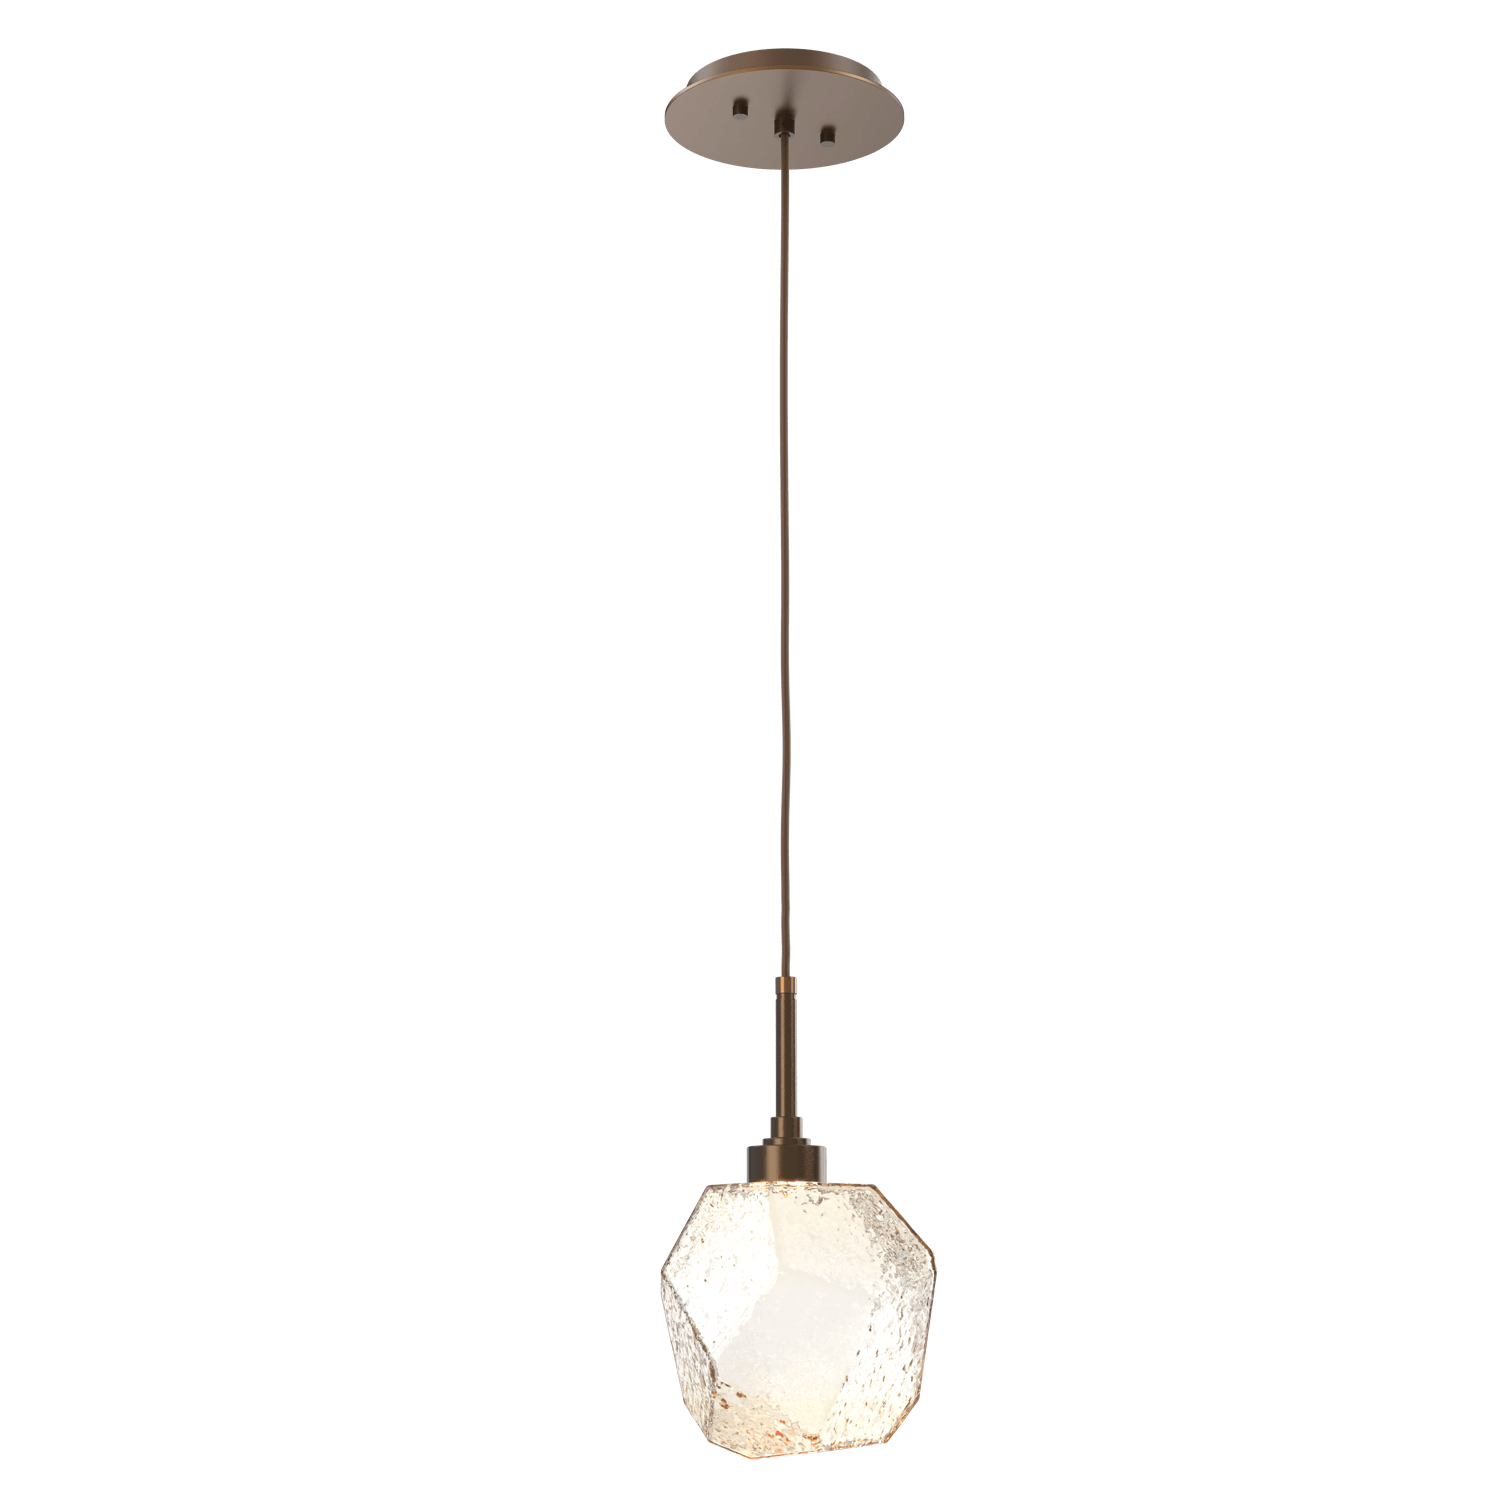 LAB0039-01-FB-A-Hammerton-Studio-Gem-pendant-light-with-flat-bronze-finish-and-amber-blown-glass-shades-and-LED-lamping